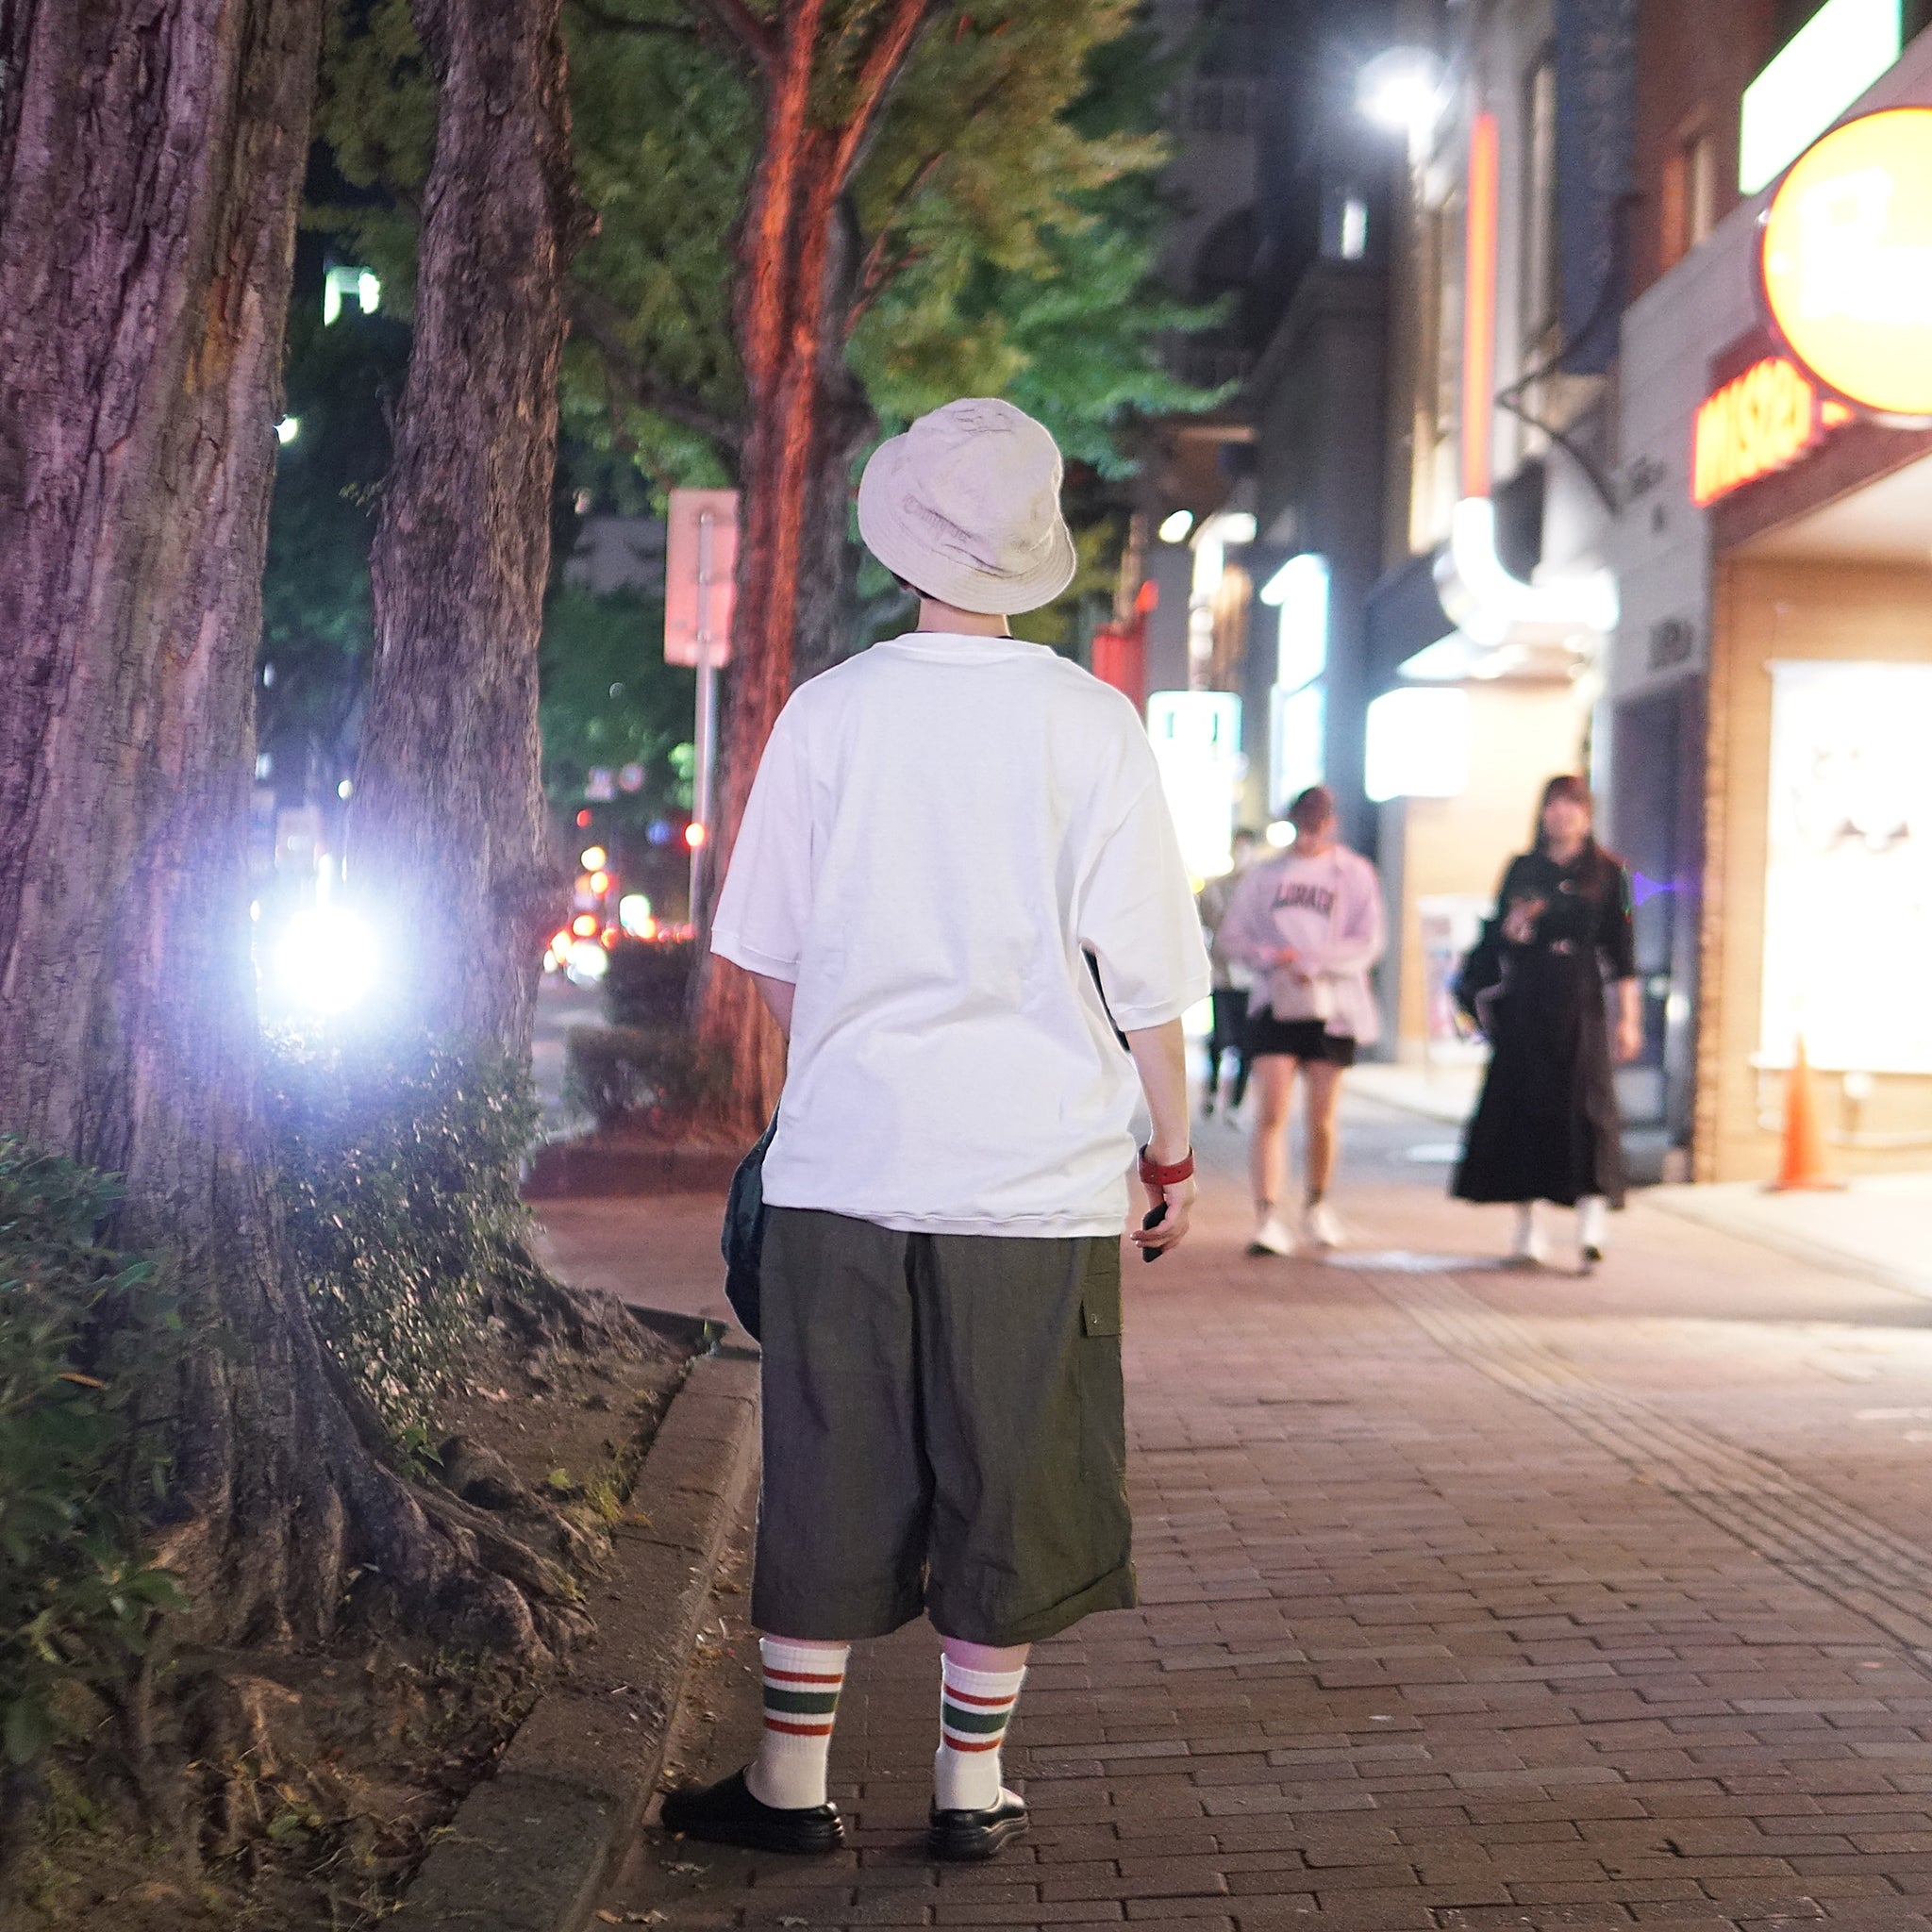 No:FIT-01 | Name:WIDE CREW NECK S/S T-SHIRTS | Color:White/Black【FIT_フィット】